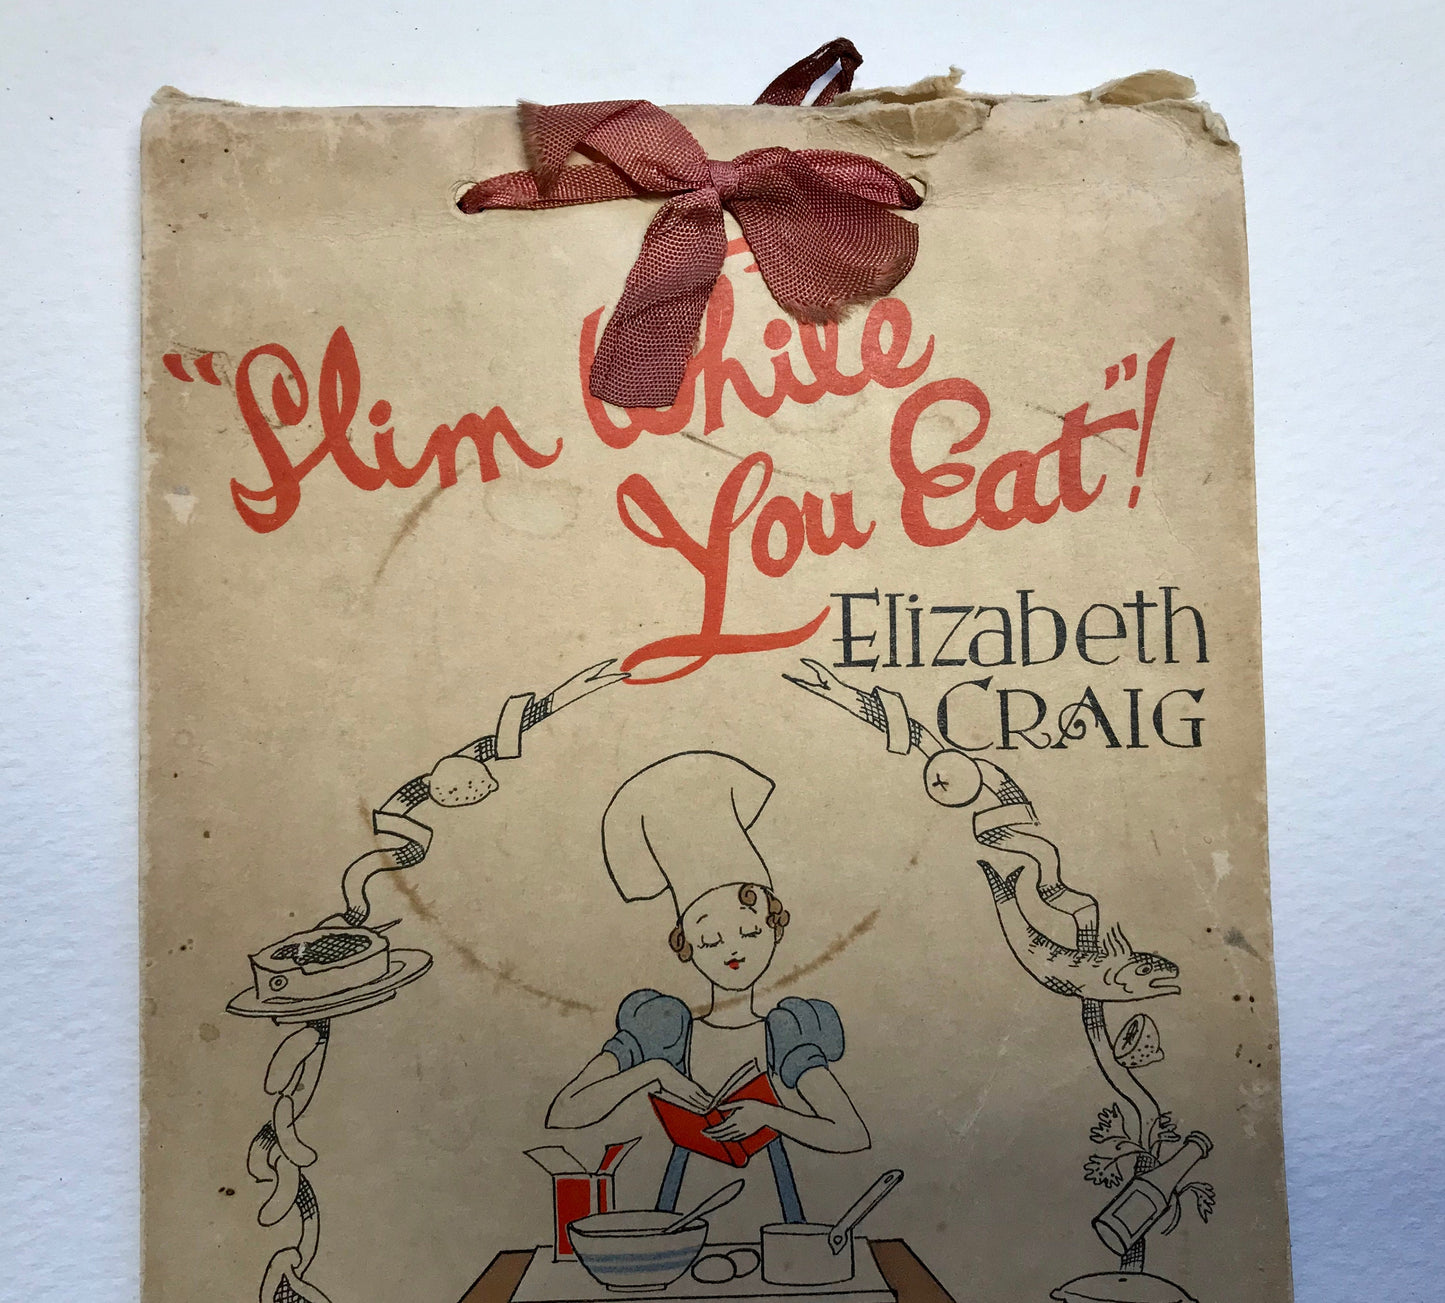 Slim While You Eat! A Calendar with over 100 Recipes. By Elizabeth Craig. Published by G. Delgado Ltd in 1940. 21 x 14 cms. A rare book.